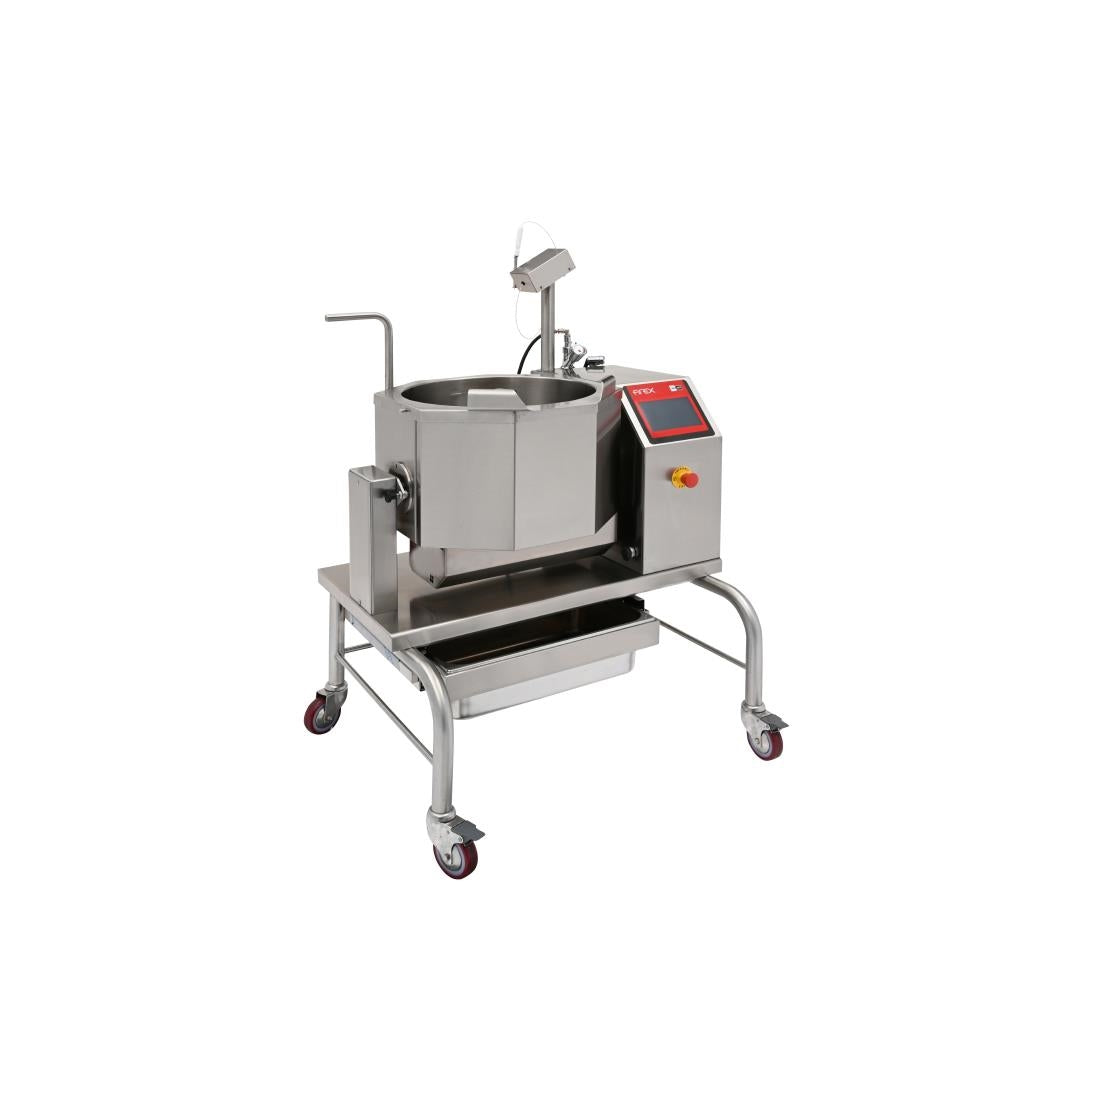 CH241 Firex Cucimix Multipurpose Automated Industrial Cooker JD Catering Equipment Solutions Ltd